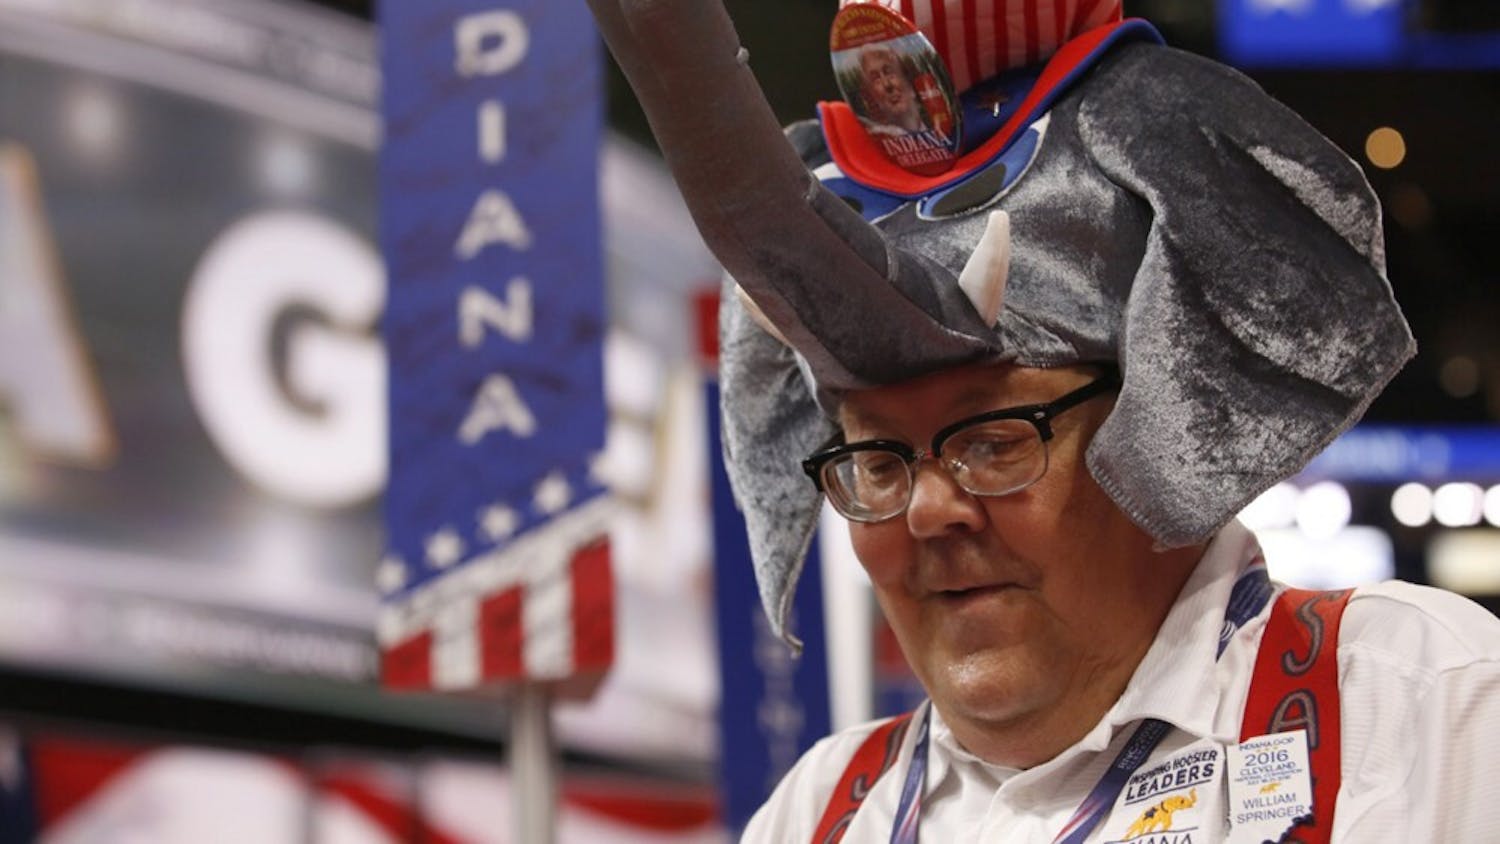 Indiana delegate William Springer sports a GOP elephant hat on the convention floor on the last day of the Republican National Convention on Thursday, July 21, 2016, at the Quicken Loans Arena in Cleveland. (Brian van der Brug/Los Angeles Times/TNS)